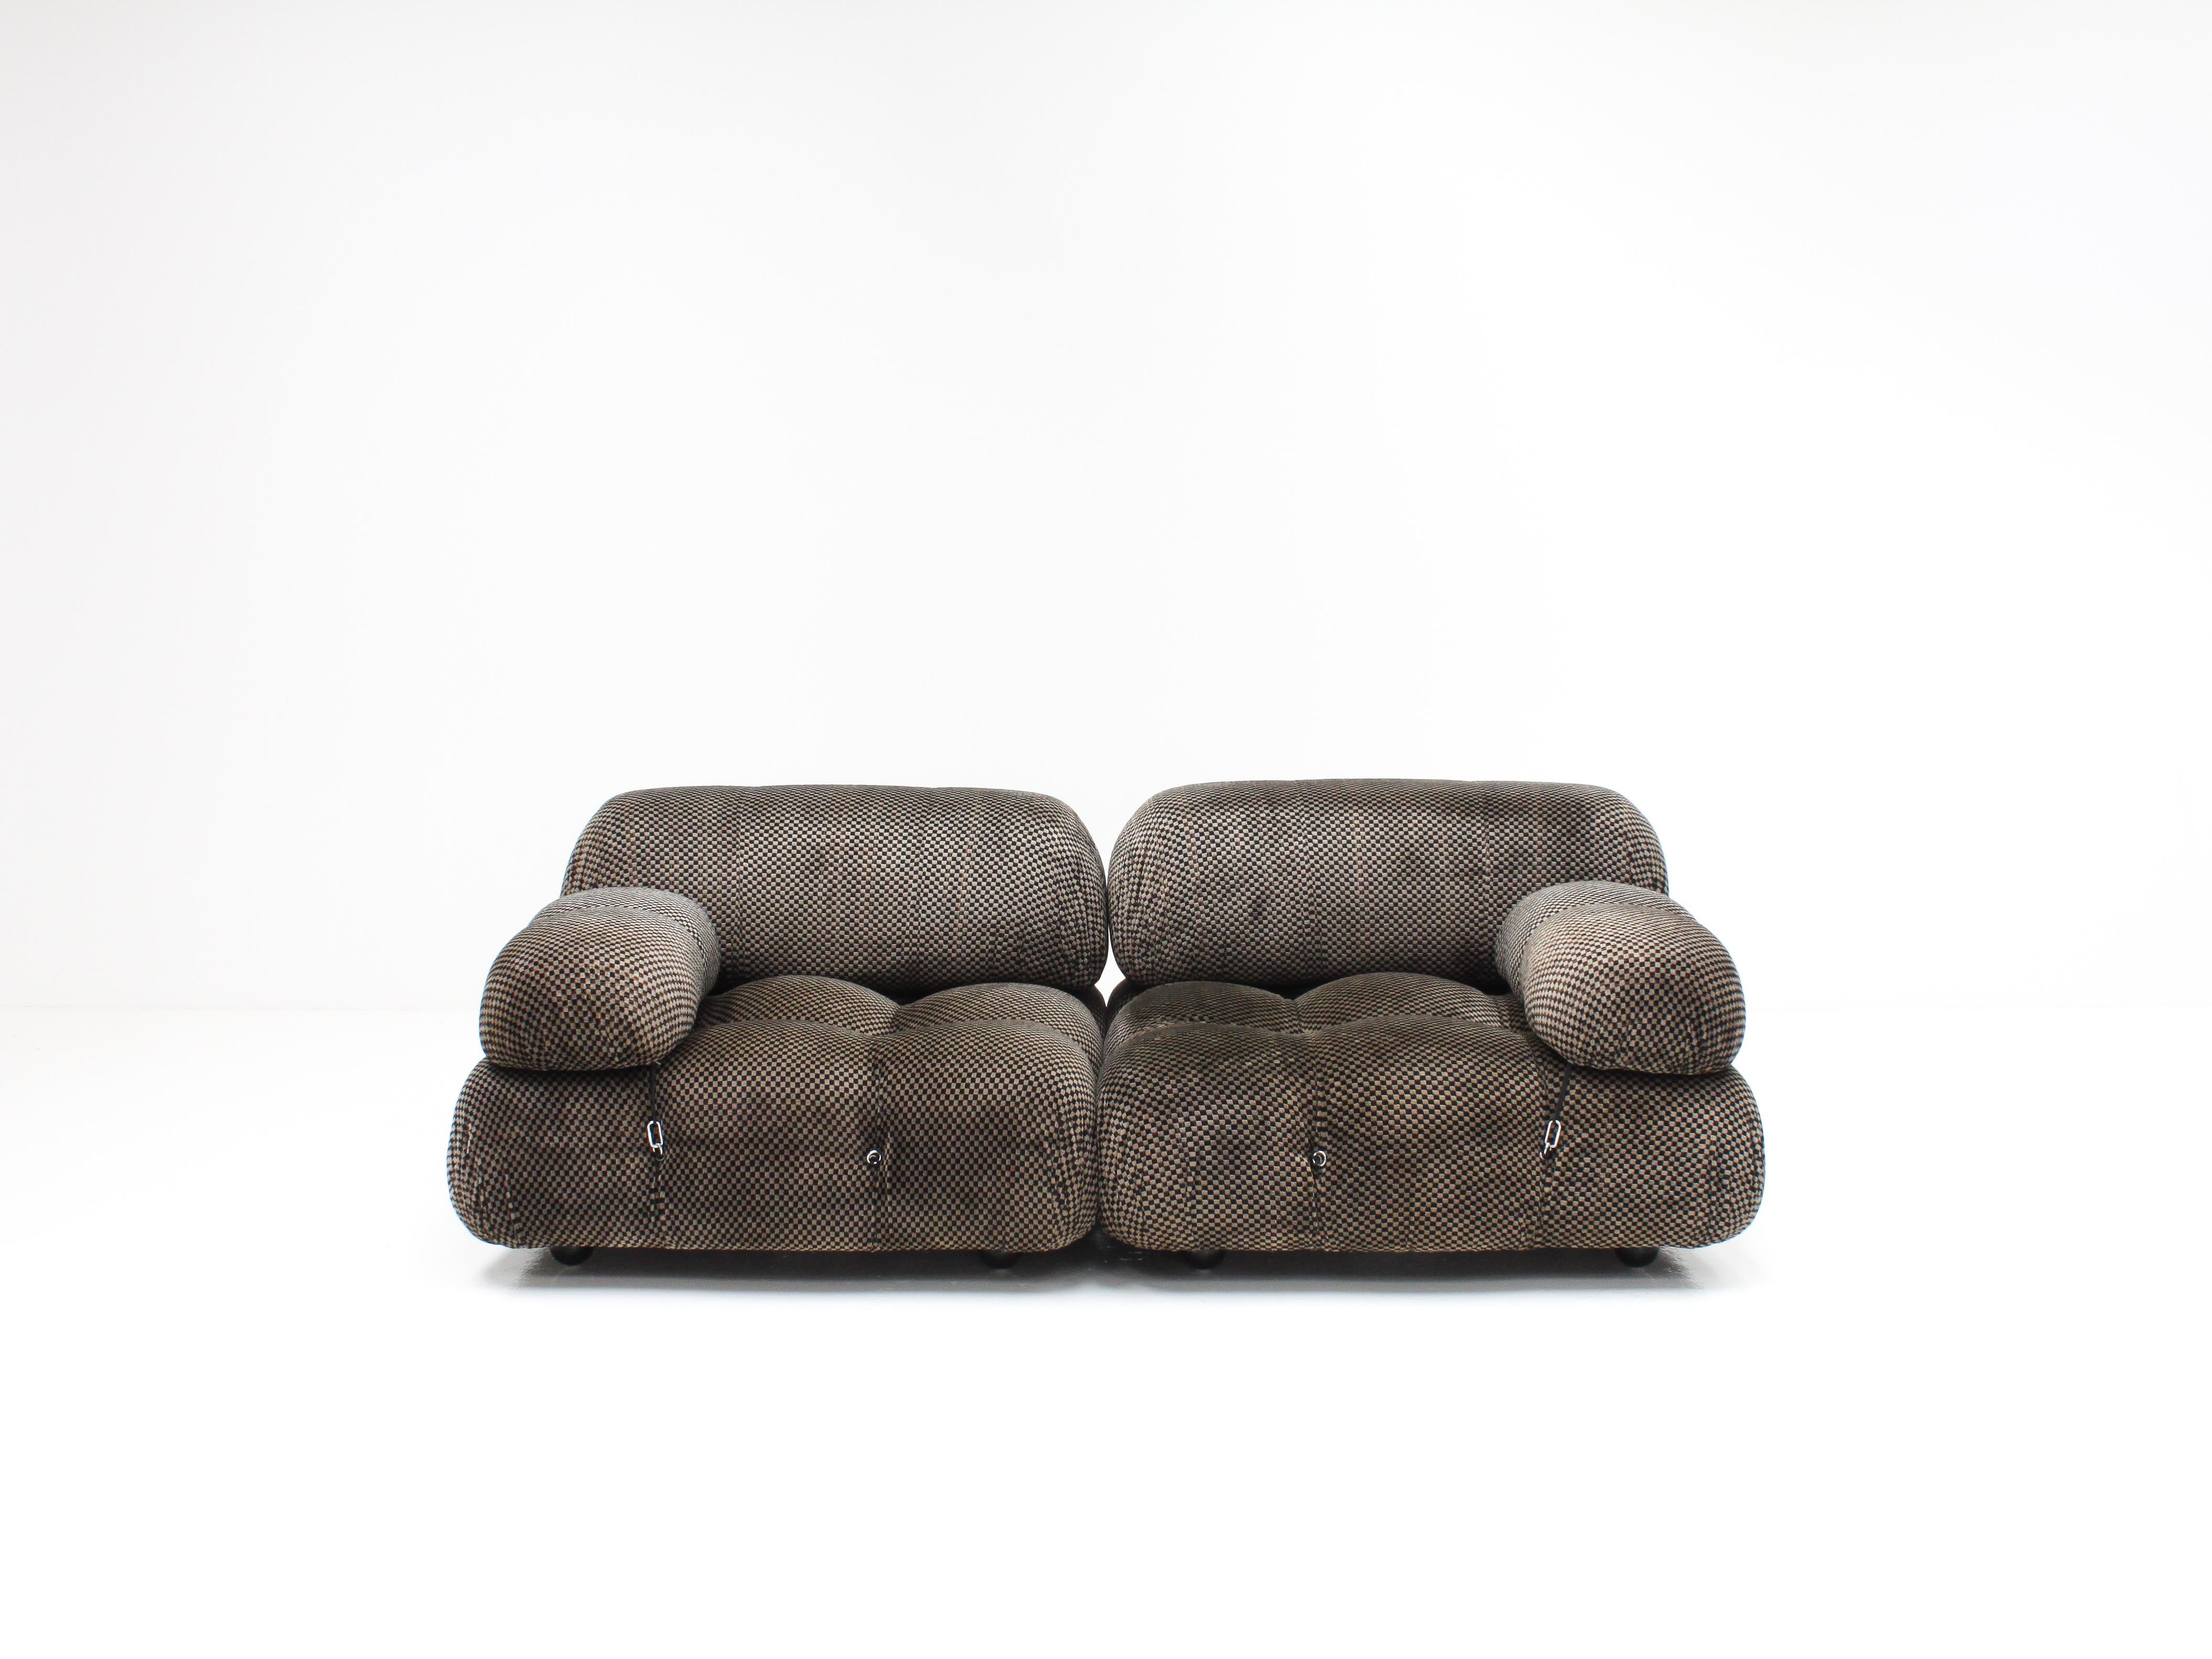 A Mario Bellini 'Camaleonda' modular sofa for B&B Italia in original fabric.

The Camaleonda was designed by Mario Bellini in 1971 and was manufactured first by C&B Italia and later by B&B Italia. This particular piece produced by B&B Italia